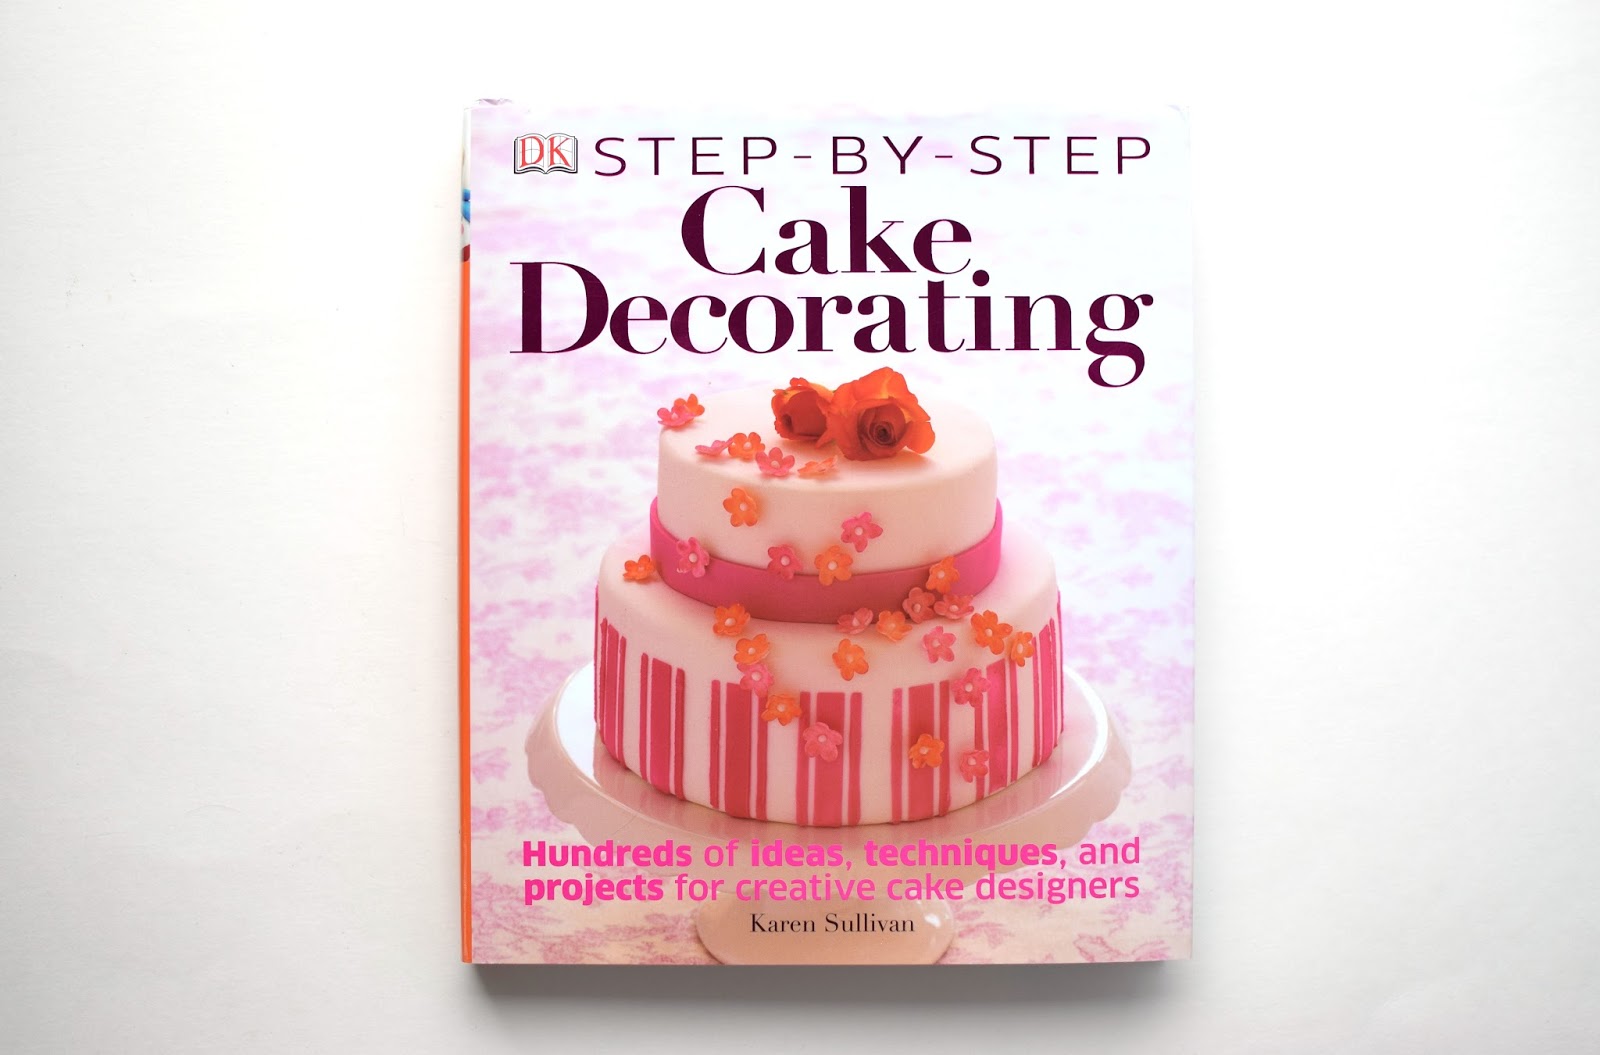 Step by Step Cake Decorating - Jane Suthering - Bakgat Books